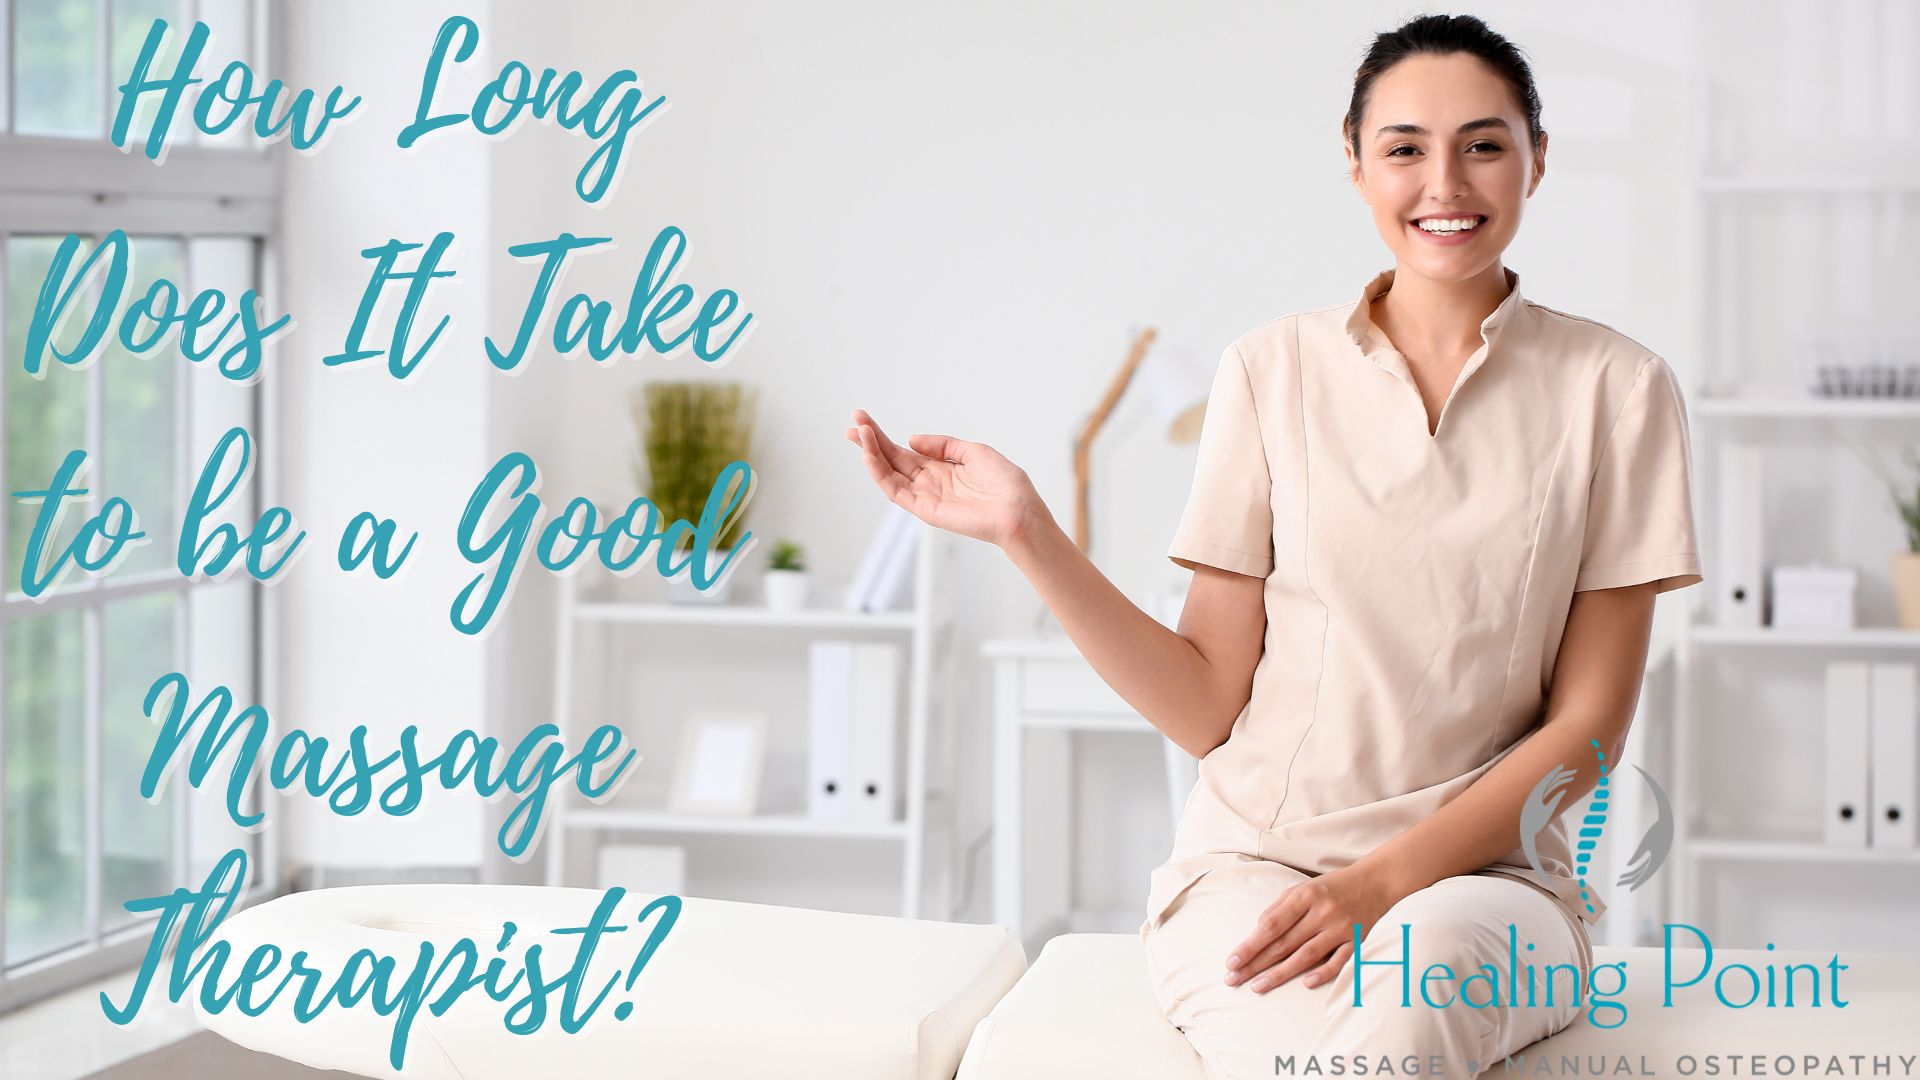 How Long Does It Take to be a Good Massage Therapist in St. Albert